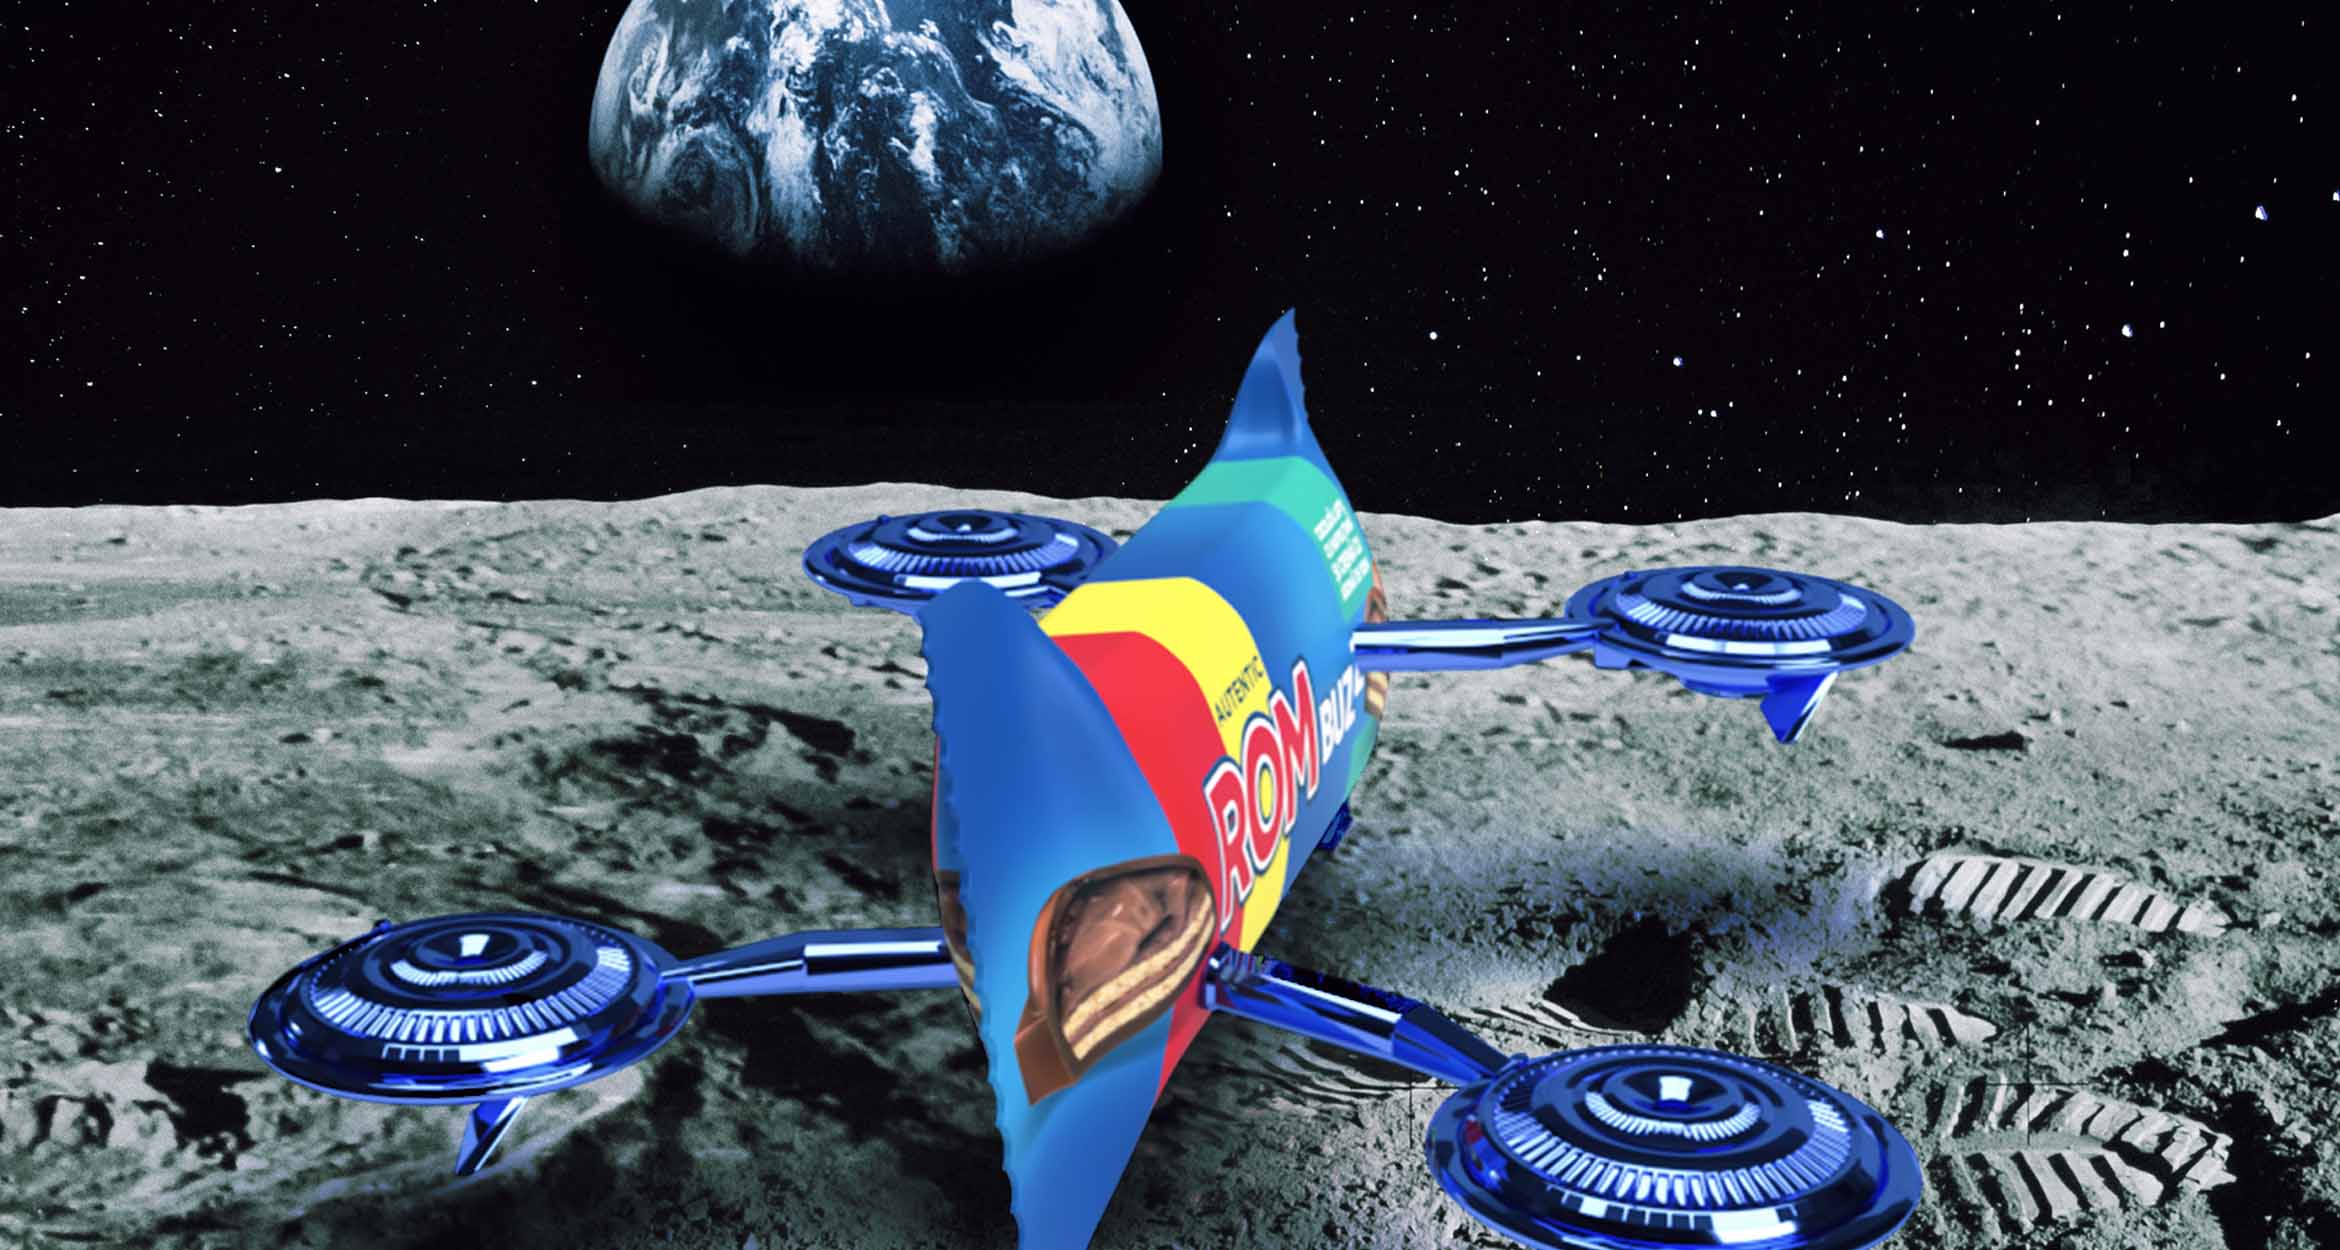 ROM Buzz candy bar spaceship on the Moon looking out at Earth 